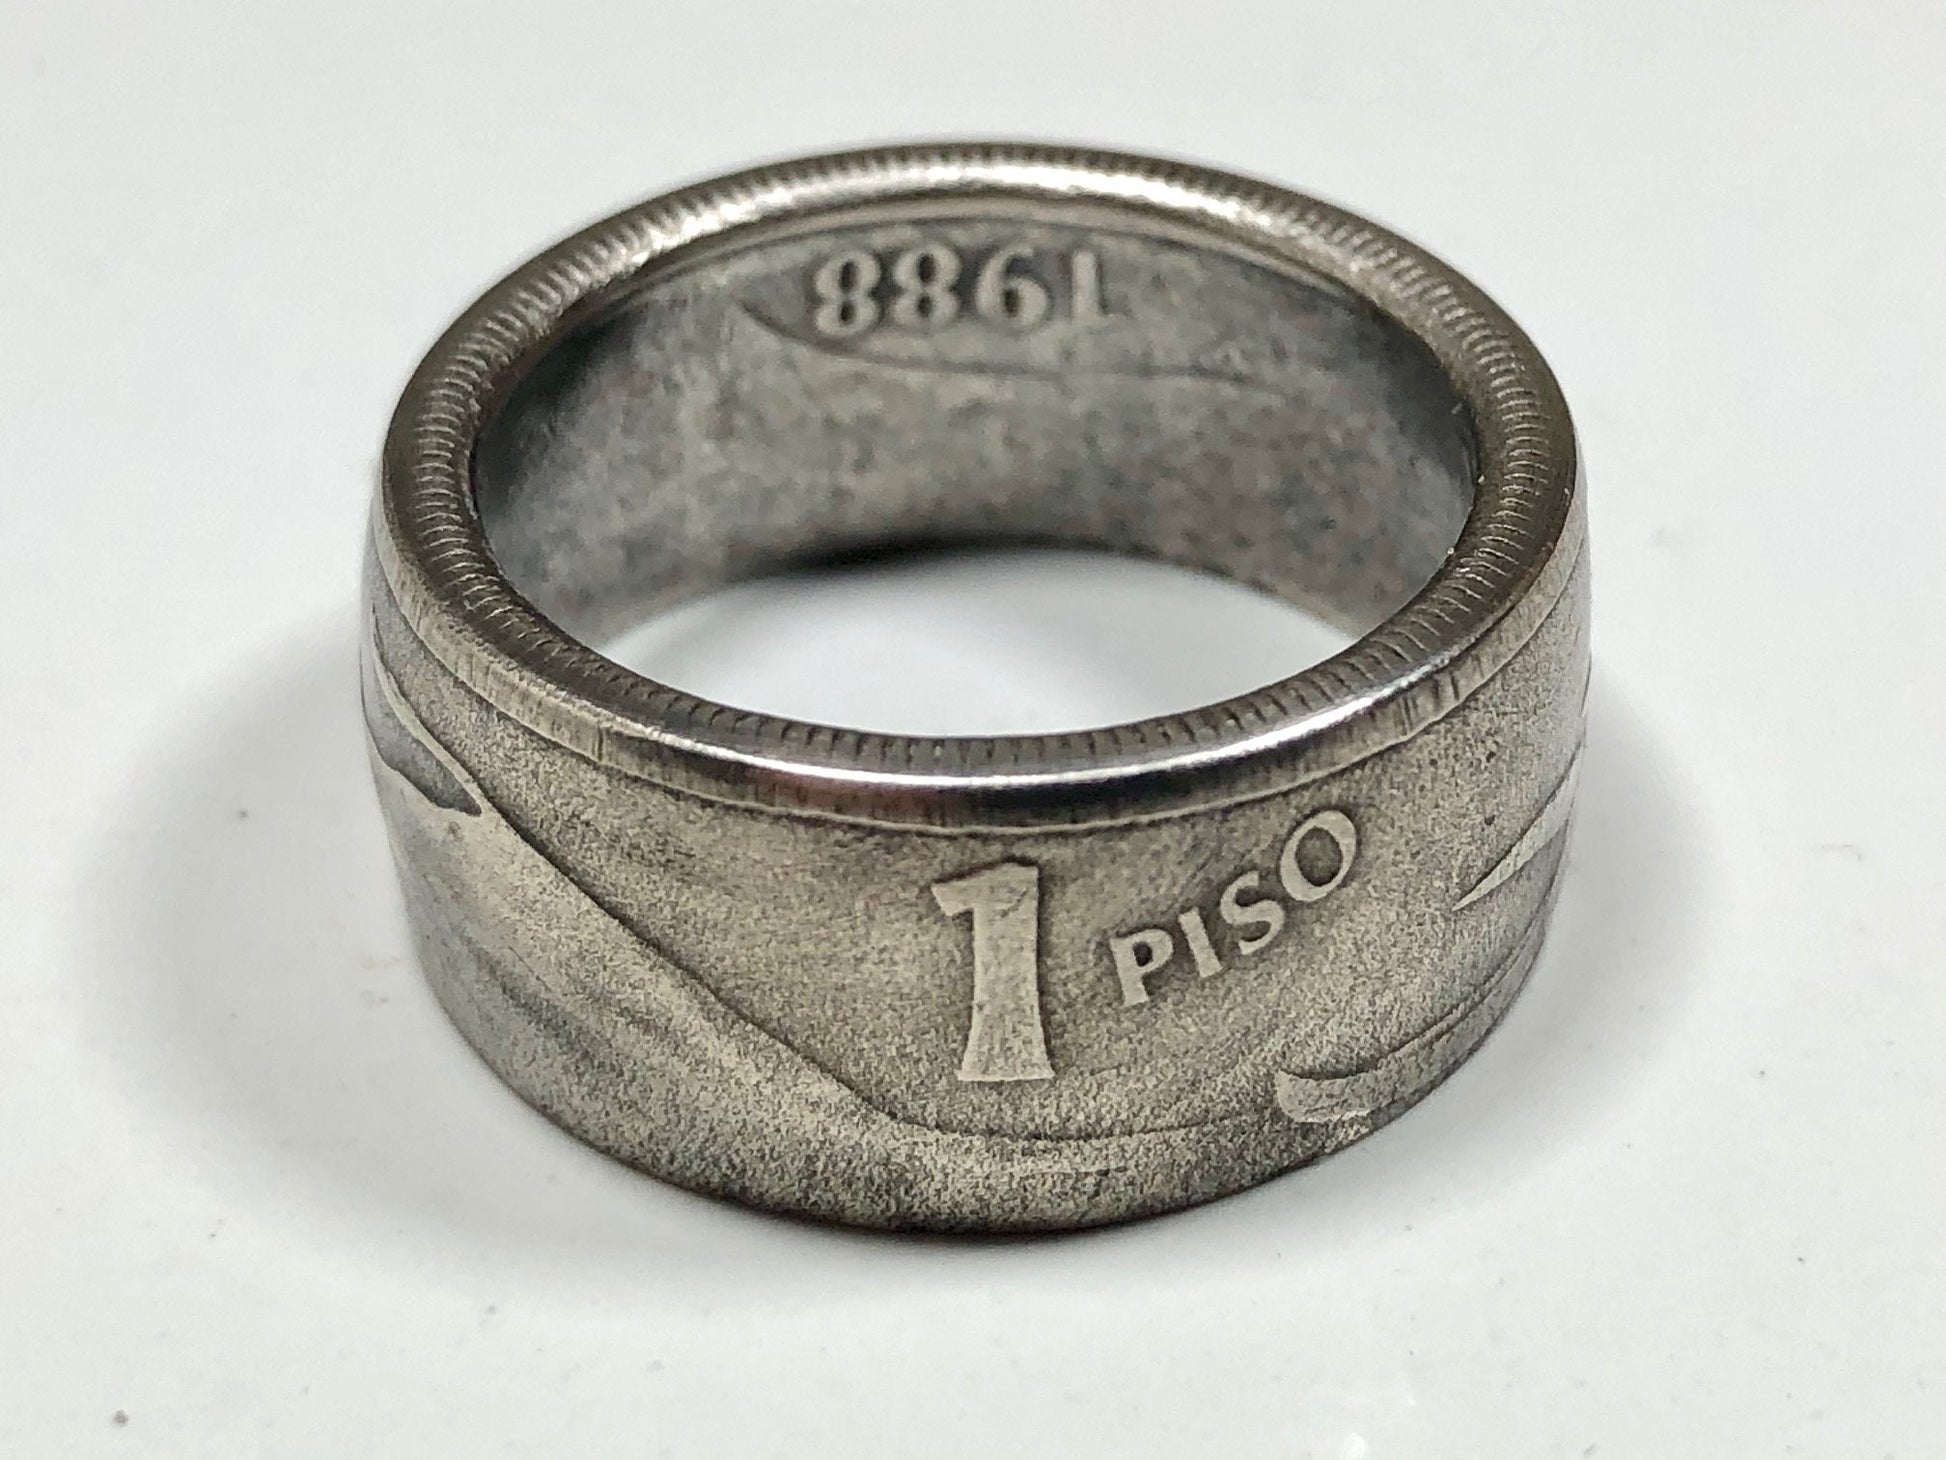 Philippines 1 Piso Philippine Coin Ring Handmade Jewelry Gift For Friend Coin Ring Gift For Him Her World Coins Collector